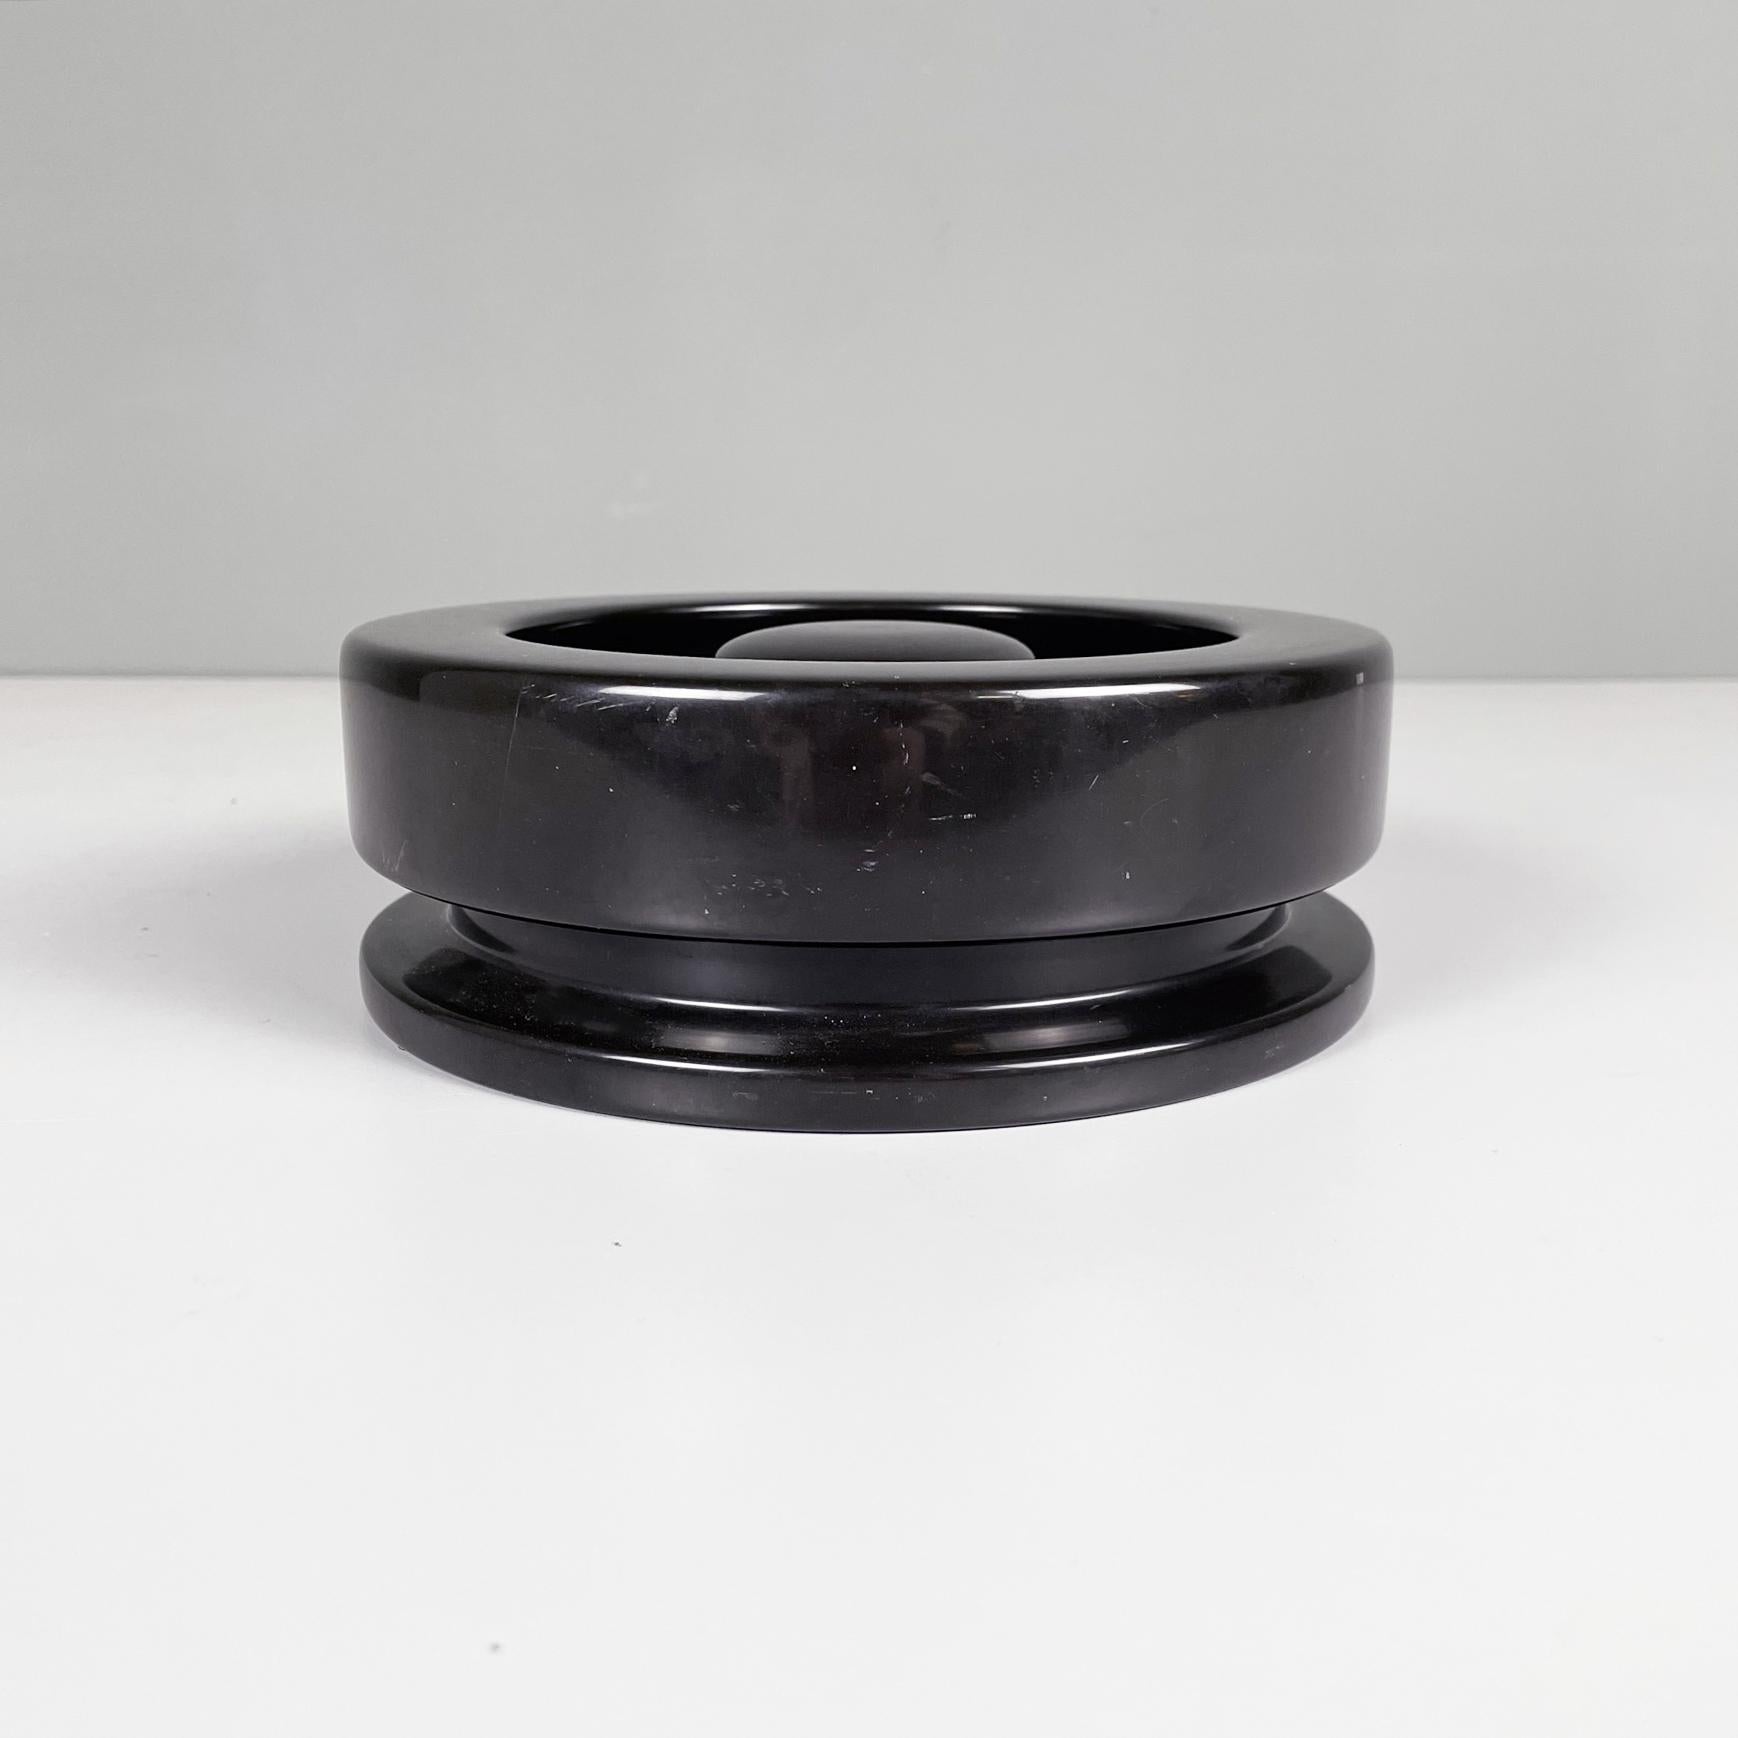 United States of America modern Black marble Ashtray mod. 8532 by Angelo Mangiarotti for Knoll, 1970s.
Iconic Ashtray mod. 8532 with round base in black marble. The plate has a rise in the central area and a thick profile.
Produced by Knoll in